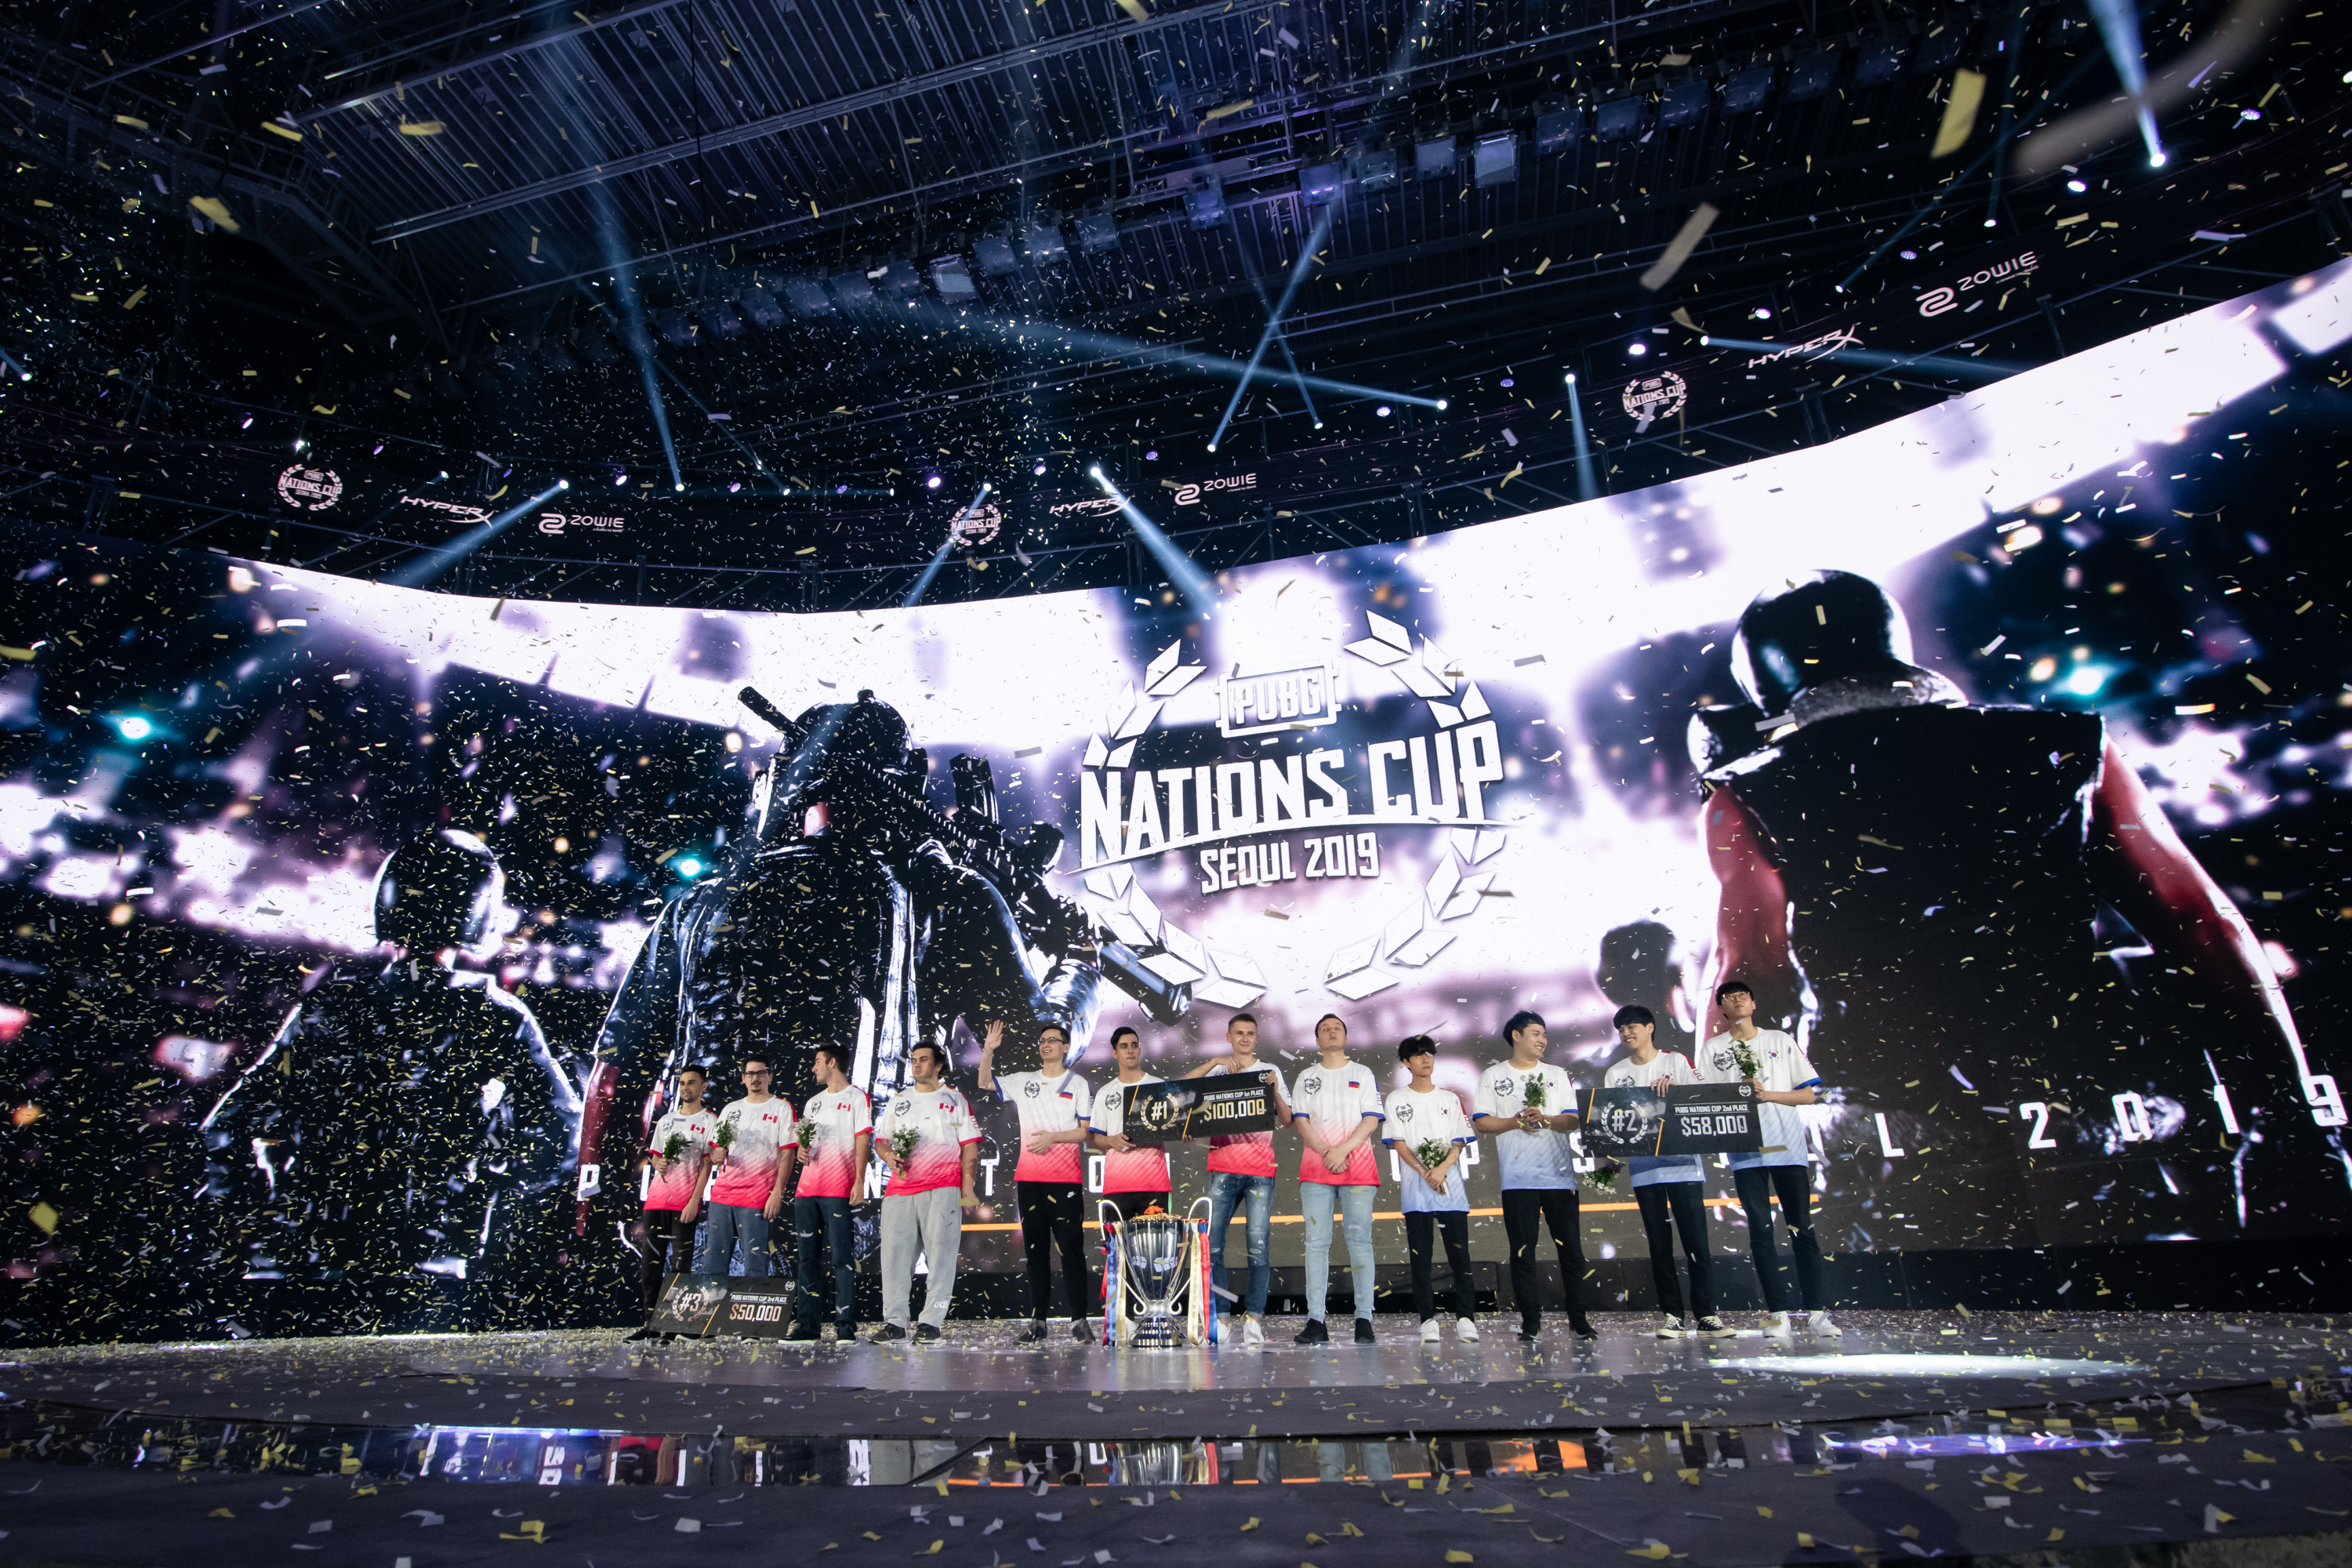 KRAFTON Announces PUBG Nations Cup To Be Held In Seoul